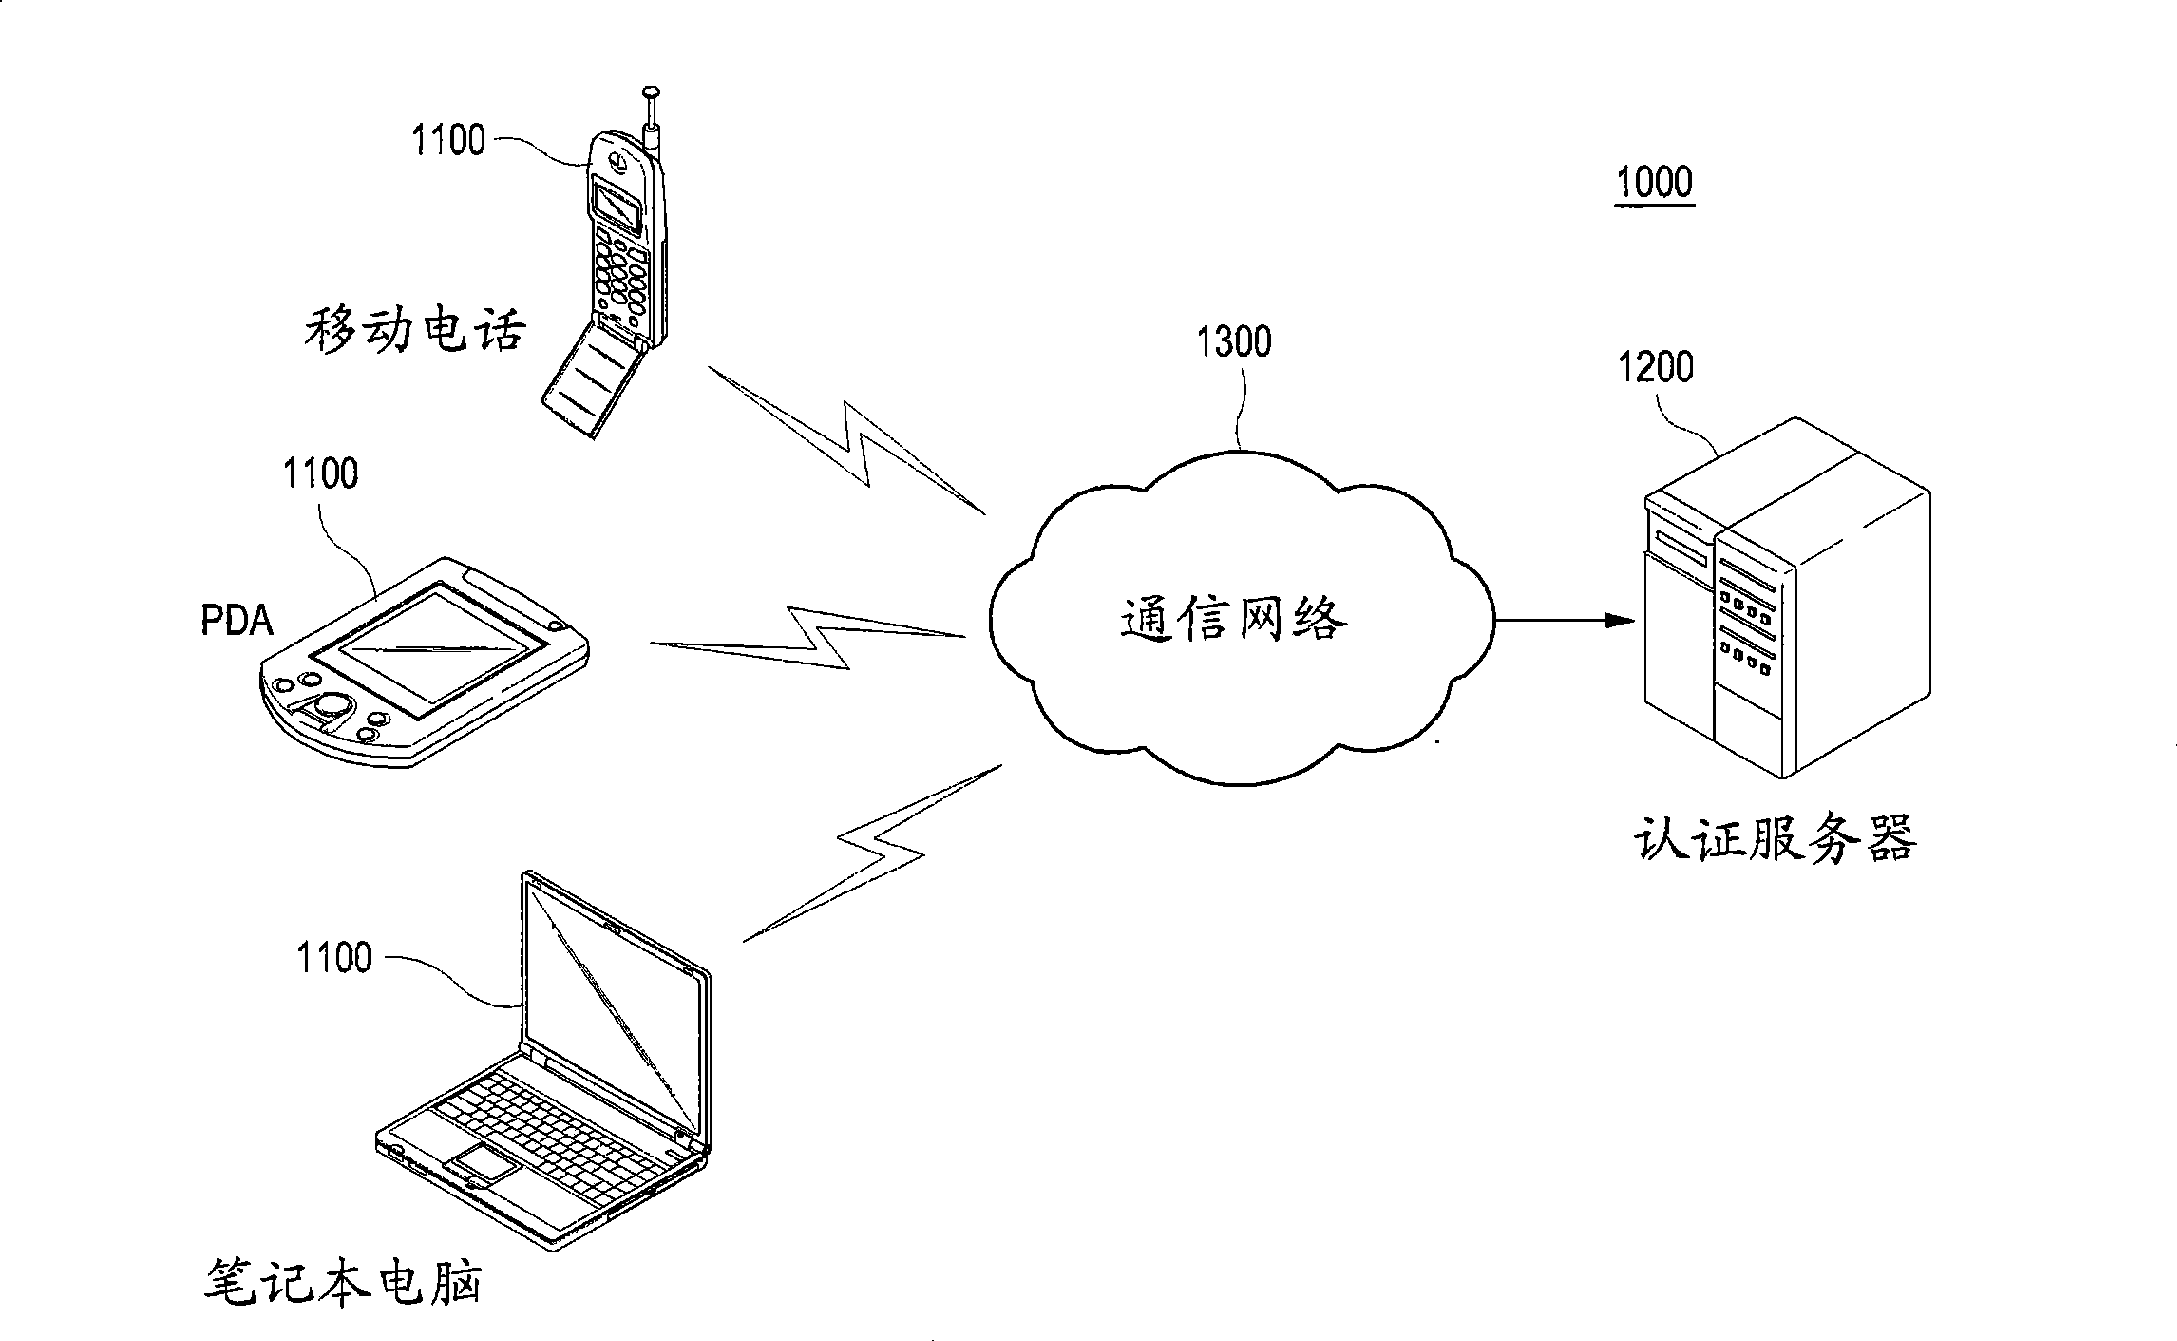 System and method for customer authentication execution based on customer behavior mode